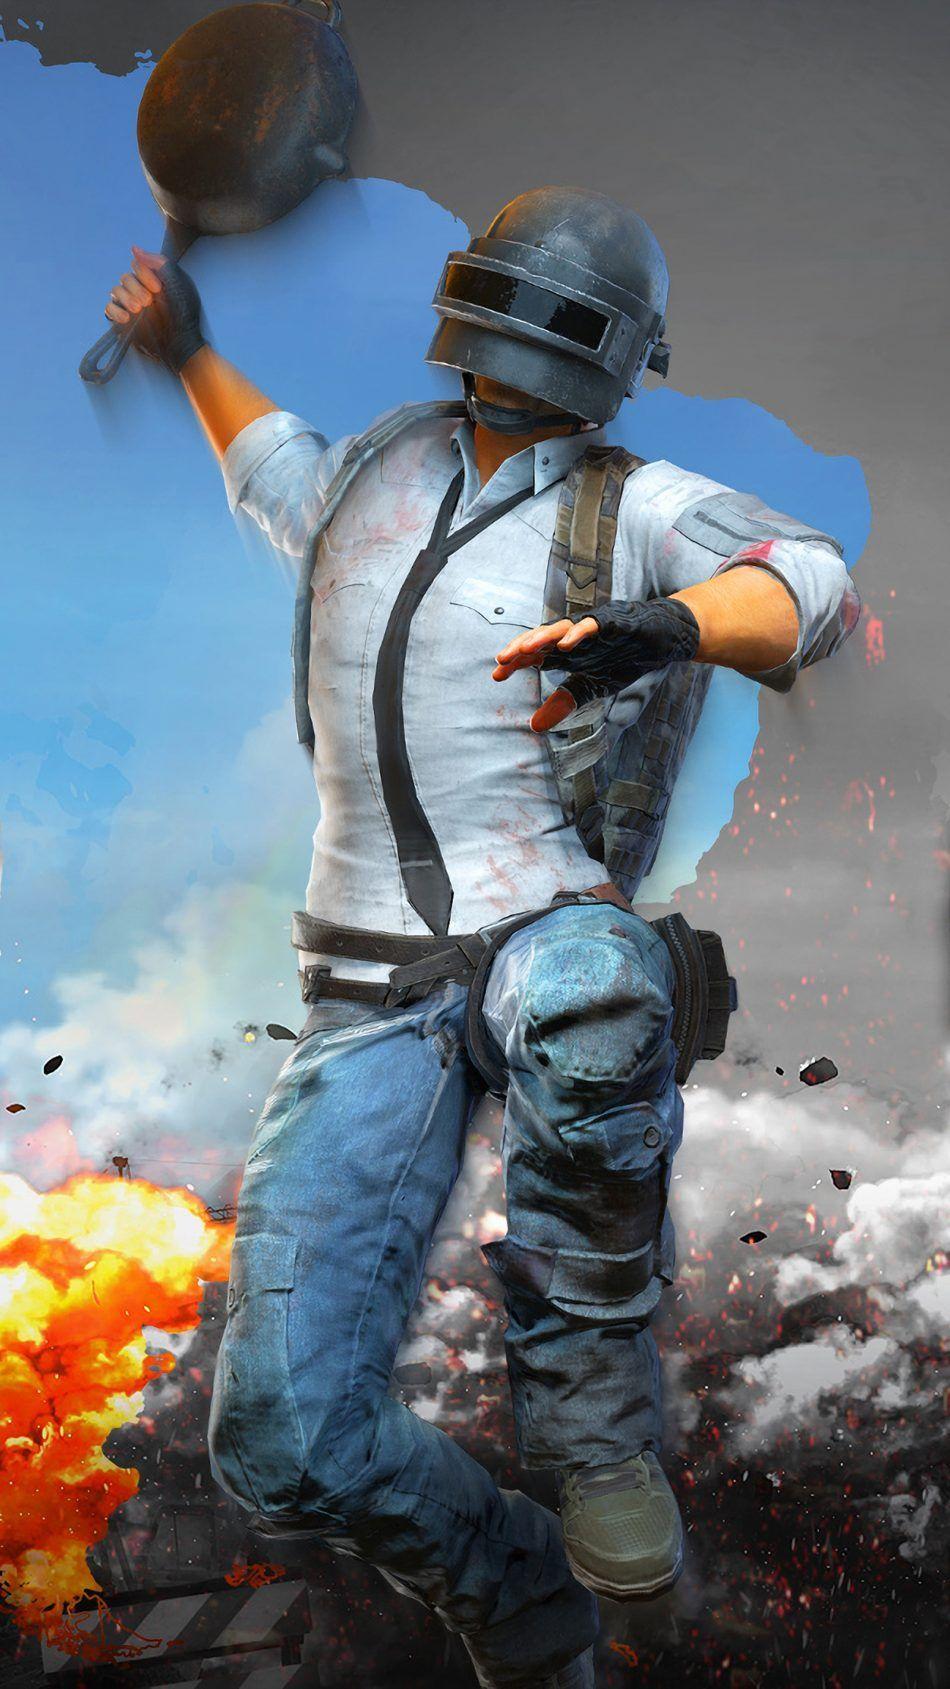 PUBG Helmet Guy Attacking With Pan. Gaming wallpaper. Mobile